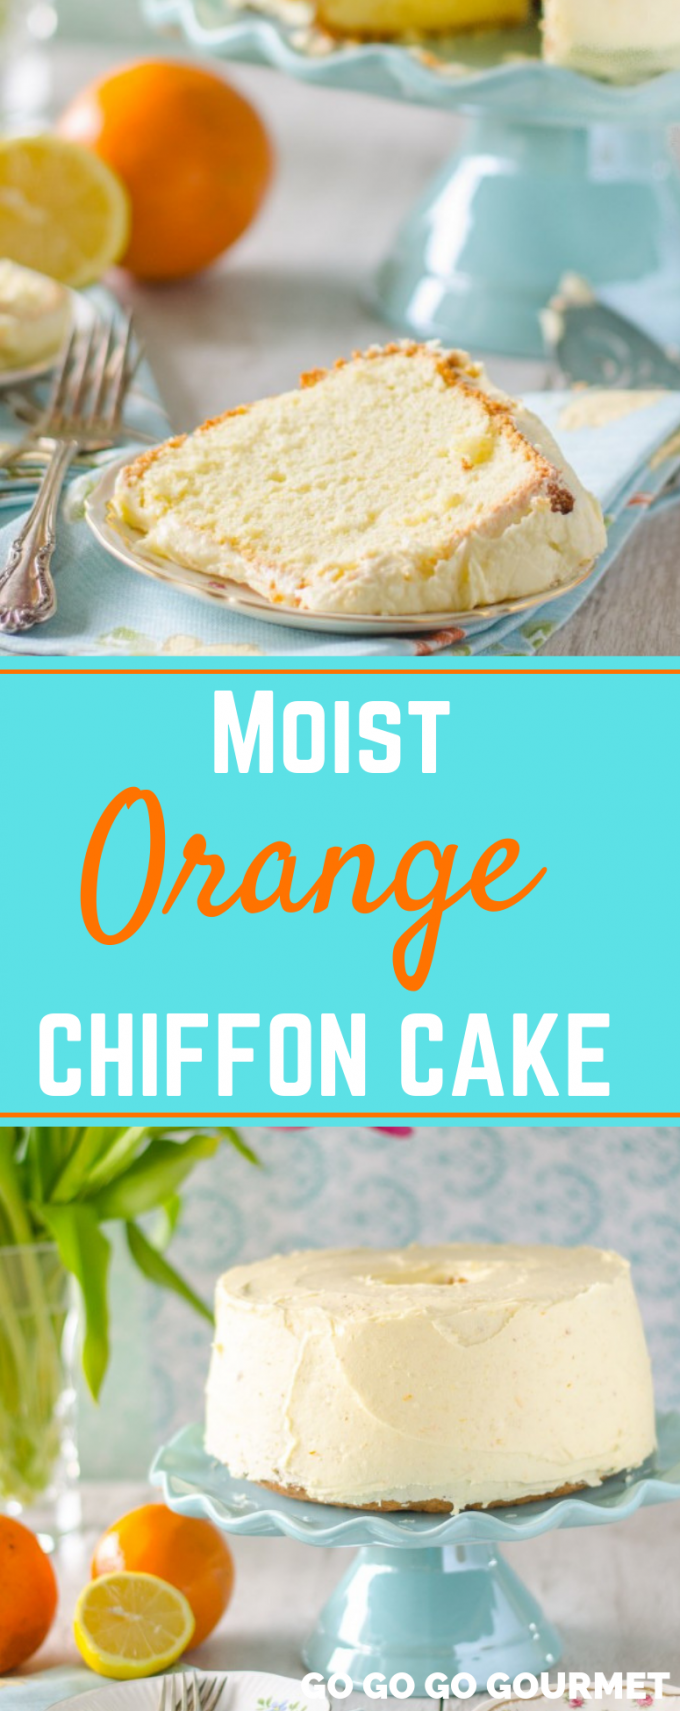 This easy Orange Chiffon Cake is even better than the Southern Living recipe! Relish in the joys of baking while making this cake. It's one of the best spring desserts and it's full of fresh flavor! #gogogogourmet #orangechiffoncake #easyorangechiffoncake #springdesserts via @gogogogourmet